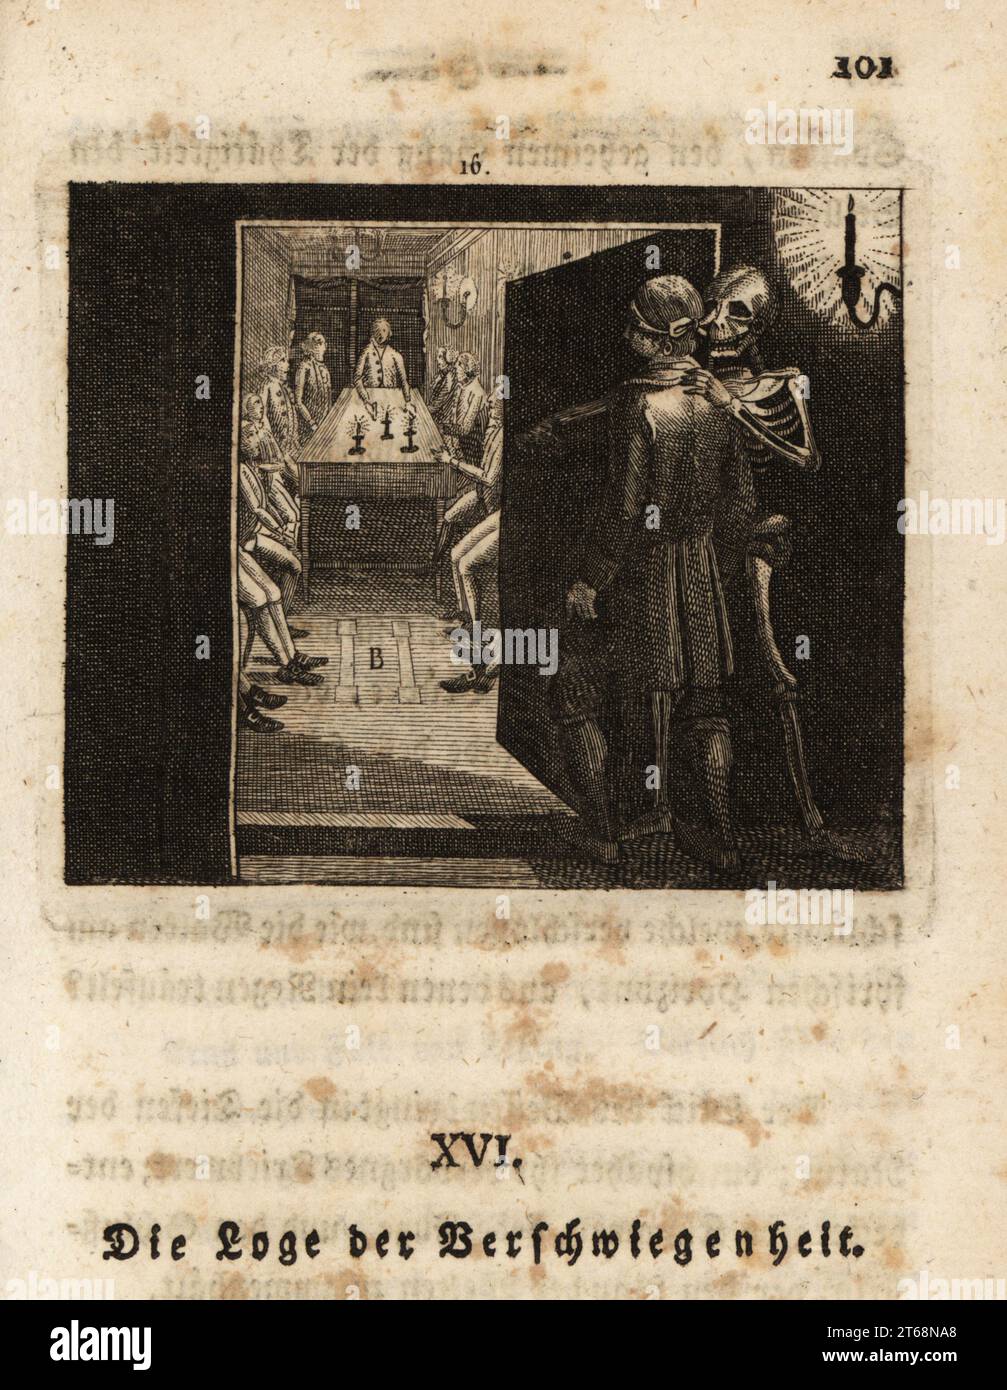 The skeleton of Death, Freund Hans, guides an initiate to a ceremony at a Masonic Lodge, 18th century. The initiate is blindfolded and enters a room with many men sitting around a table with candles. The Masonic lodge. Die Loge der Verschwiegenheit. Copperplate engraving by Johan Georg Mansfeld after an original by Johann Rudolf Schellenberg from Johan Kark Musauss Freund Heins Erscheinungen in Holbeins Manier, (Apparitions of Death in the manner of Holbein) Mannheim, 1803. Stock Photo